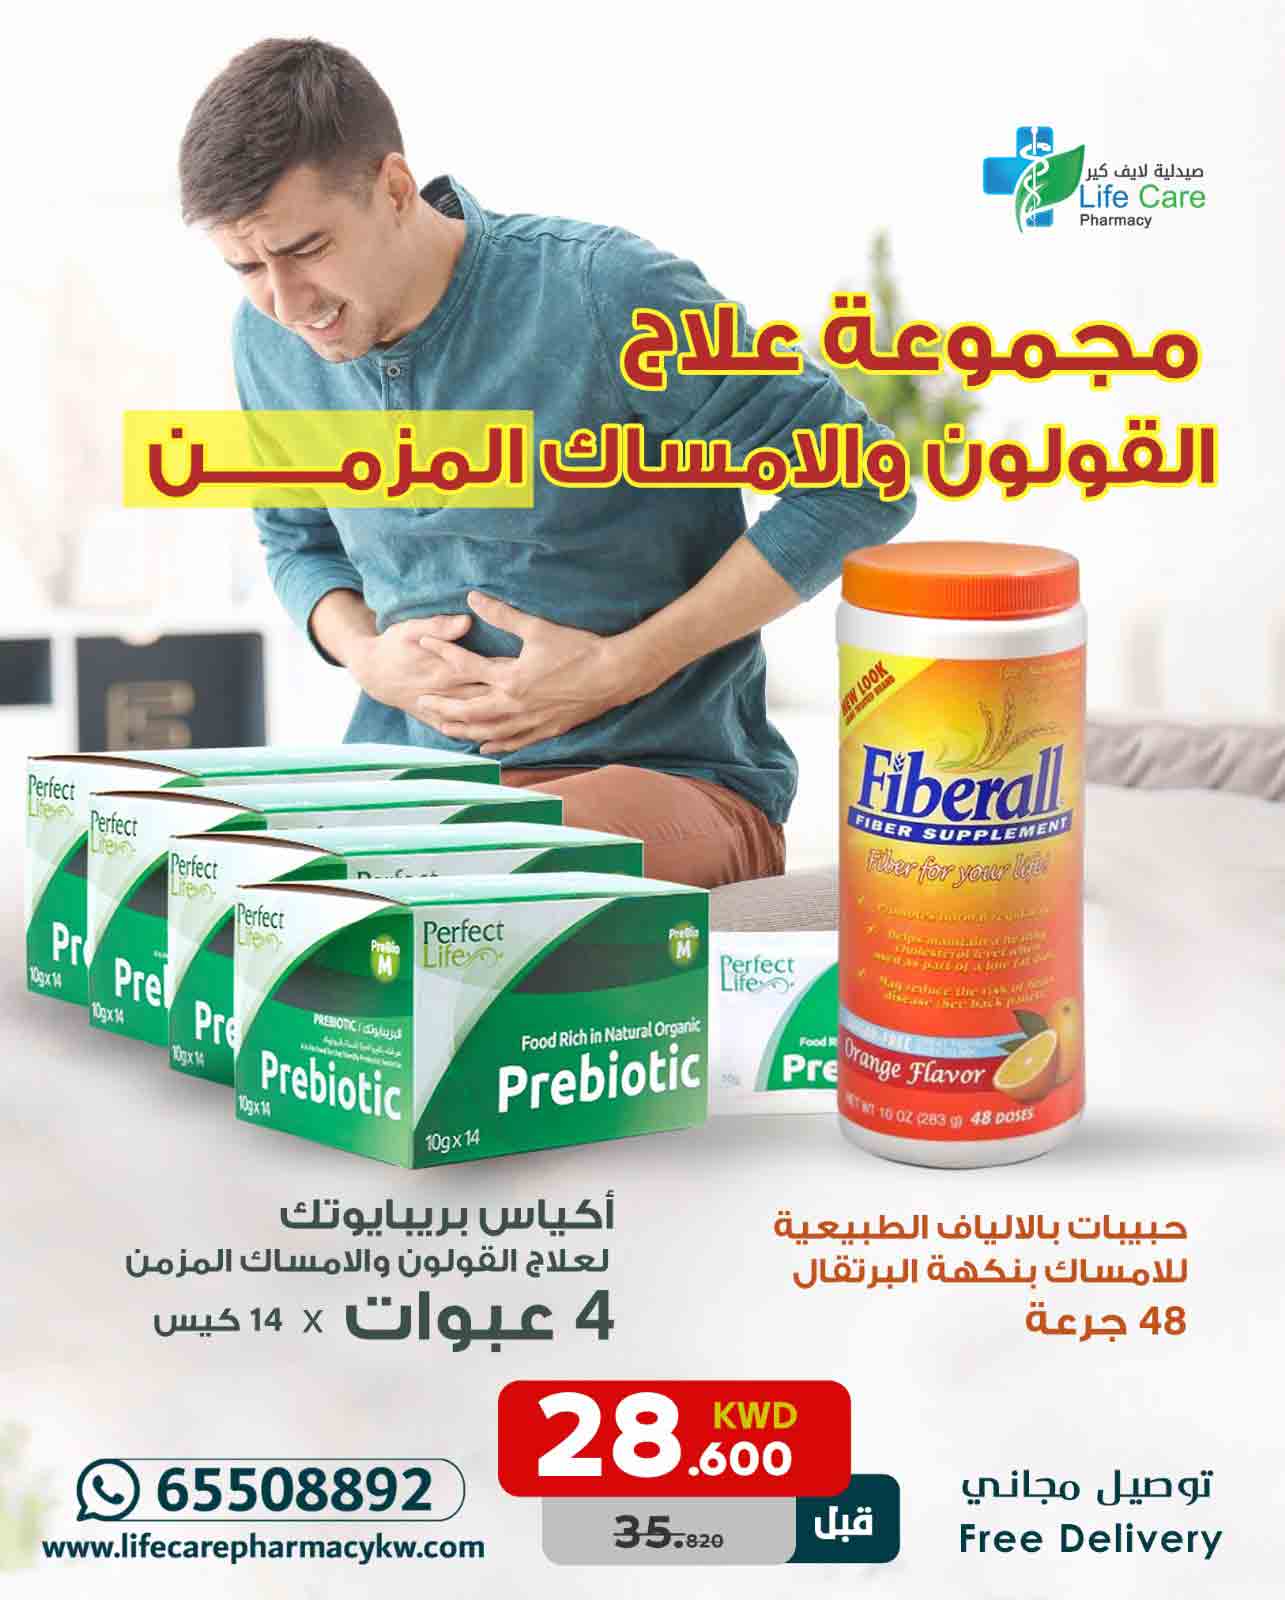 PACKAGE 281 - Life Care Pharmacy